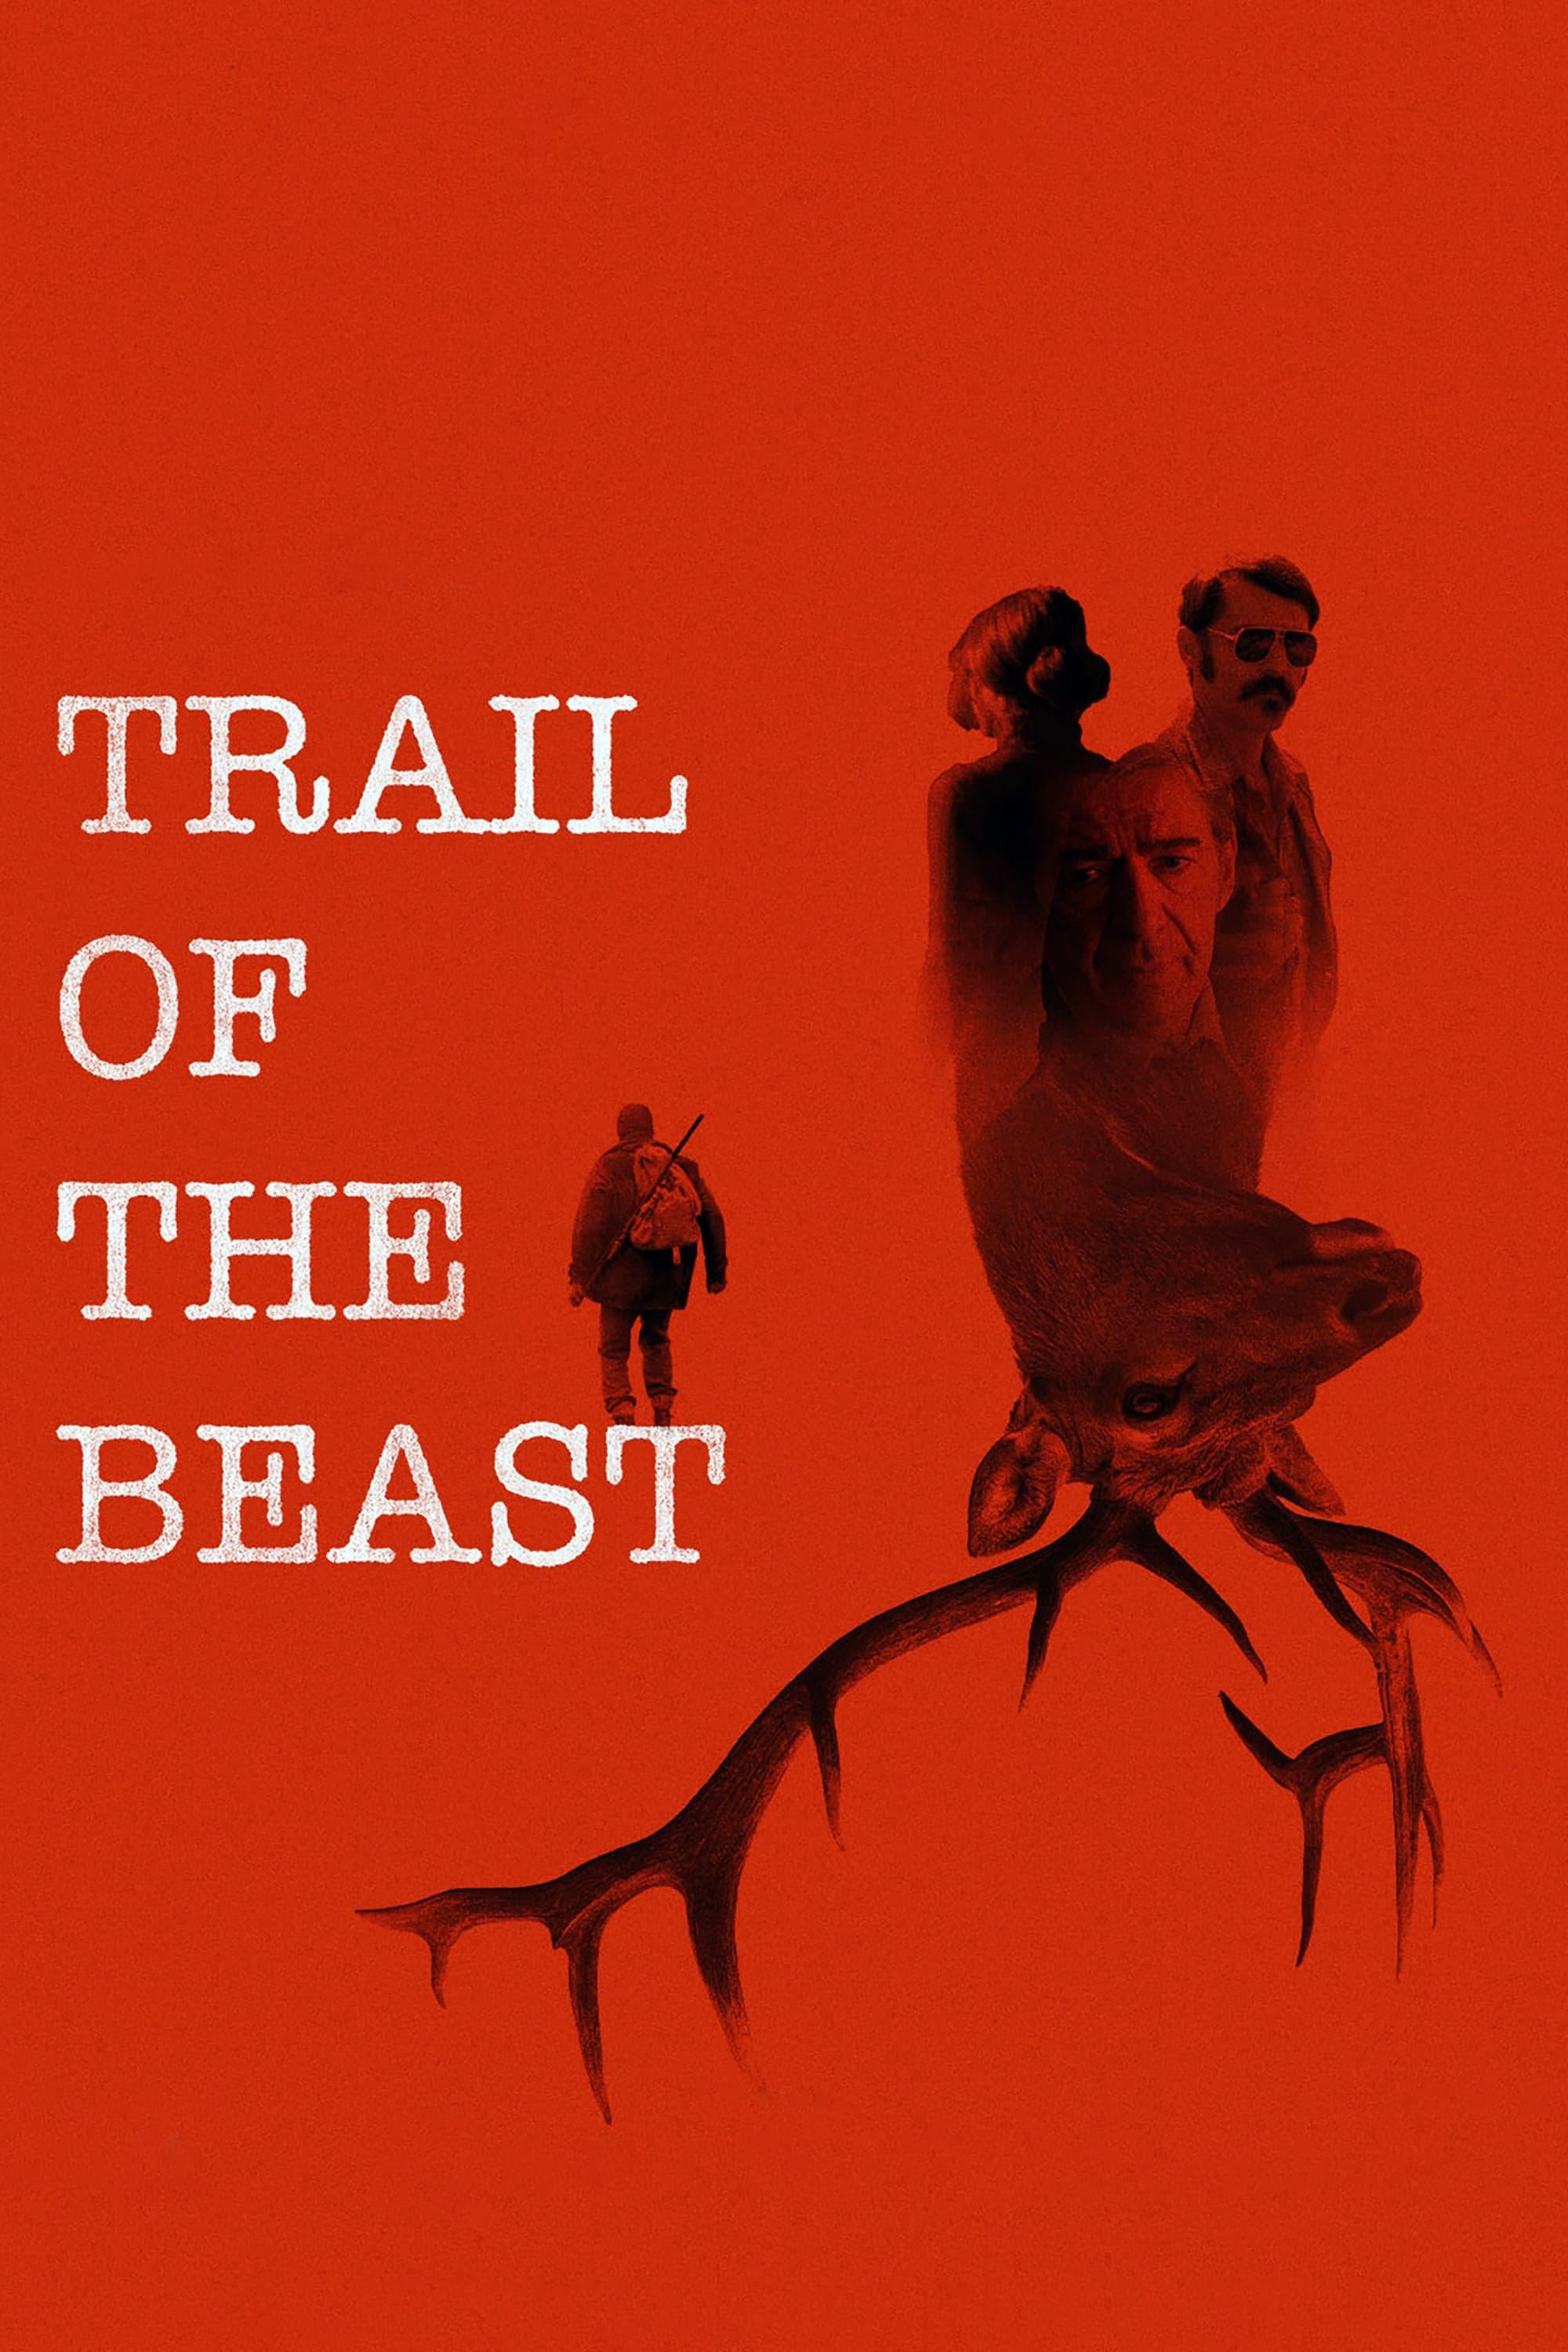 Trail of the Beast poster